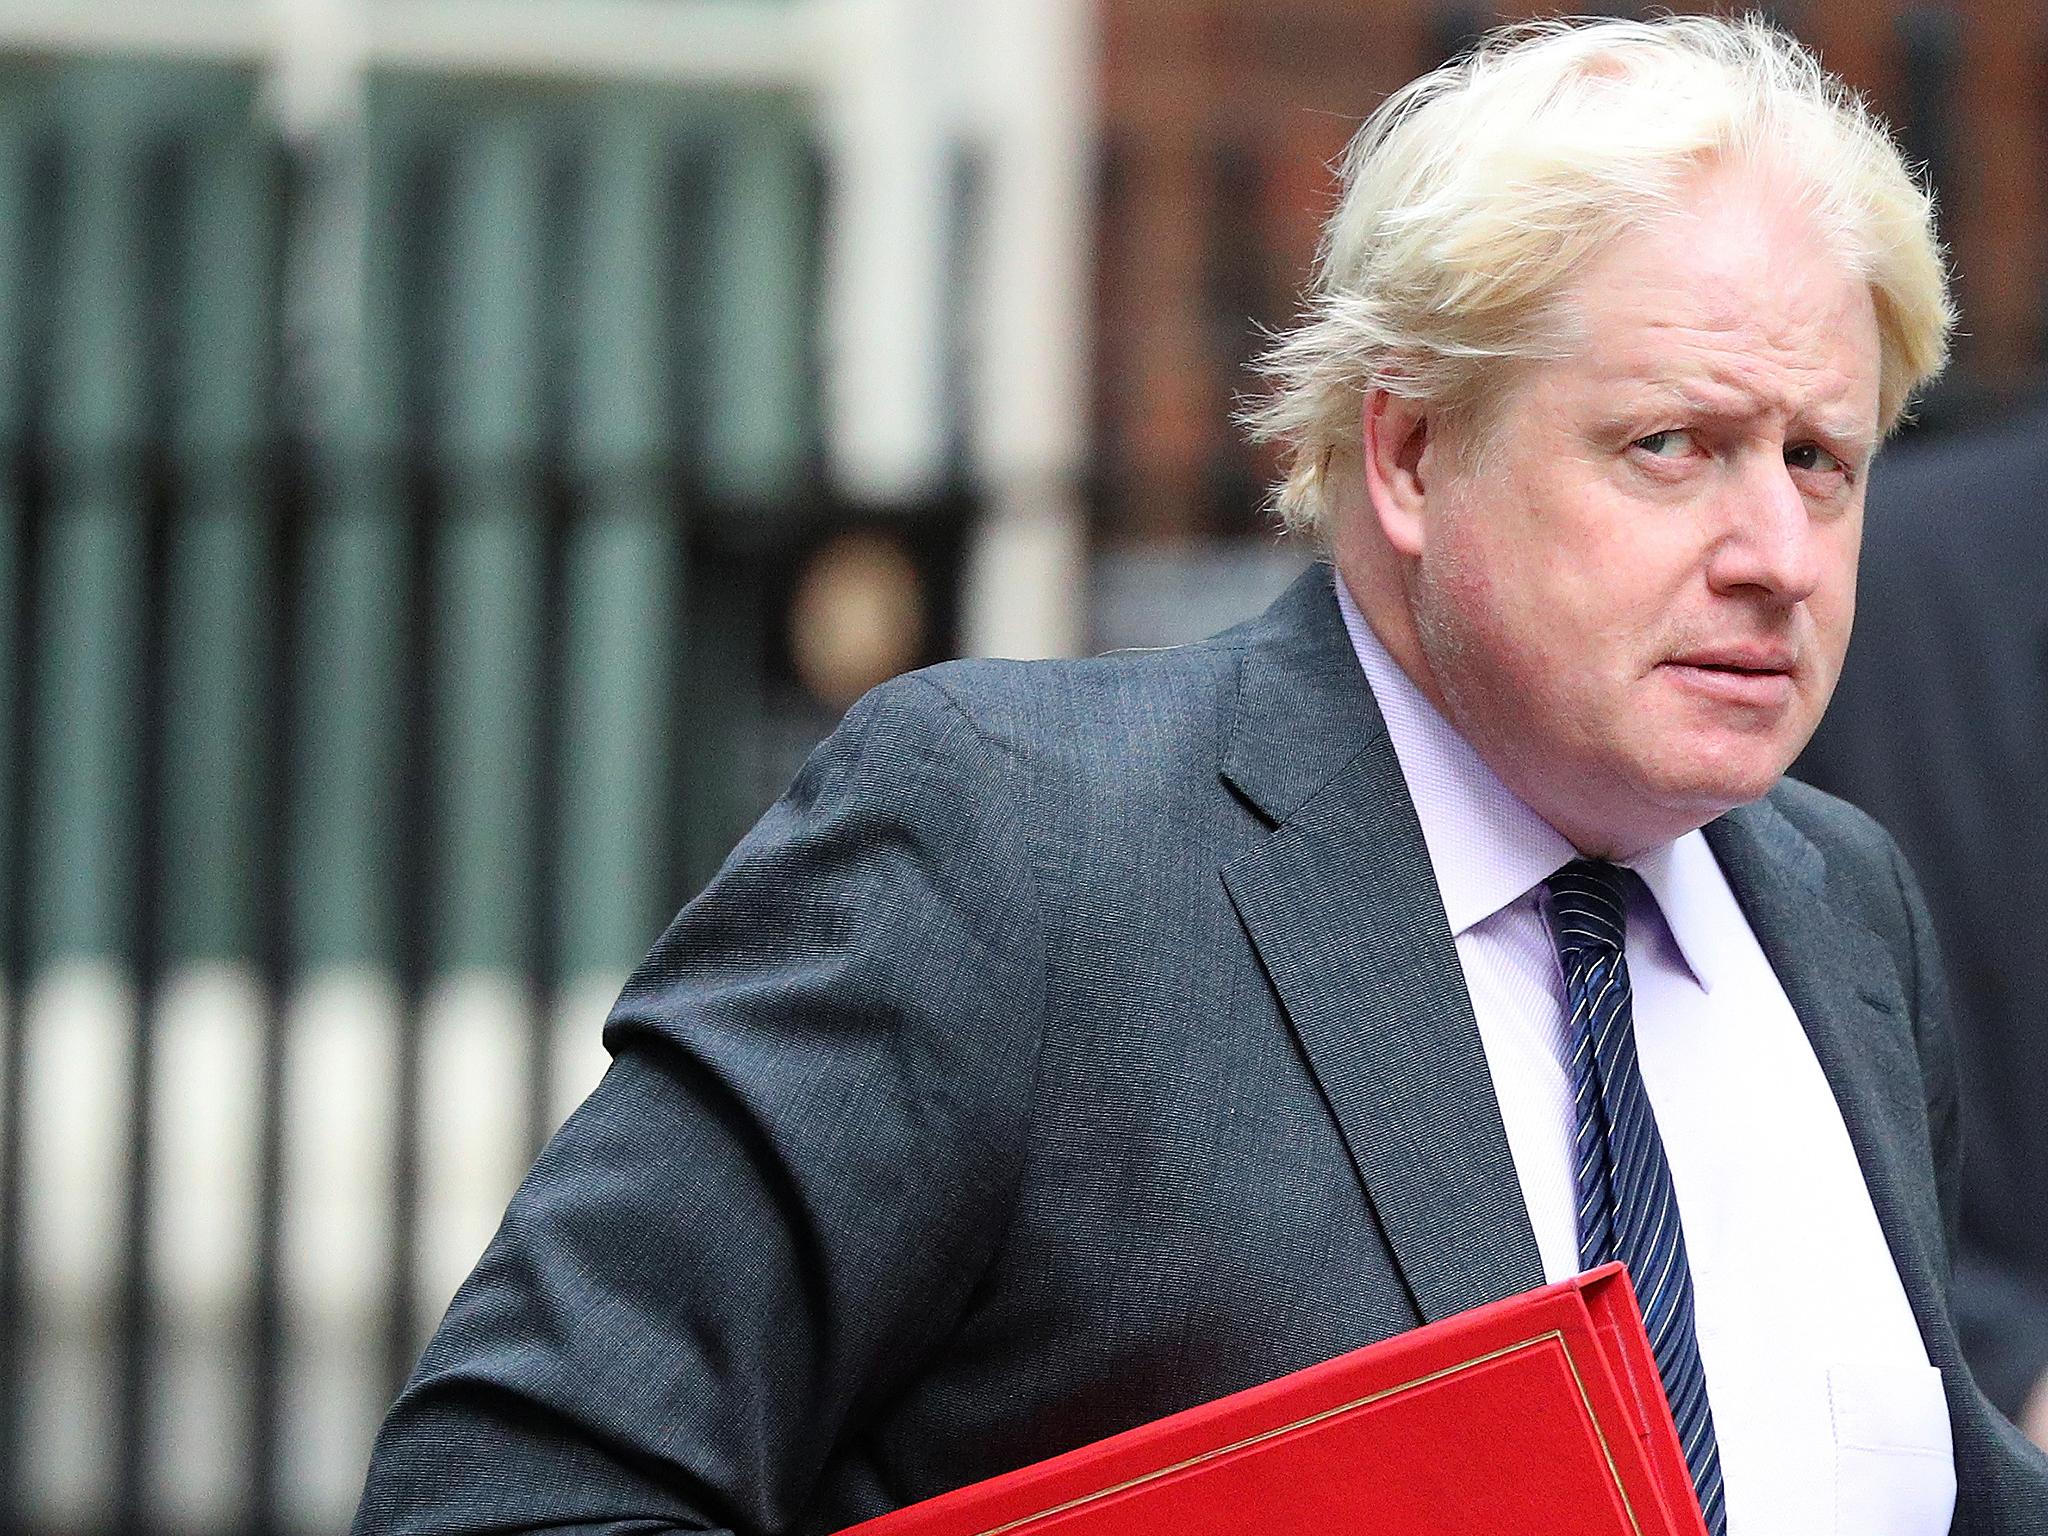 Boris Johnson has said the UK must not accept new EU rules during the transition